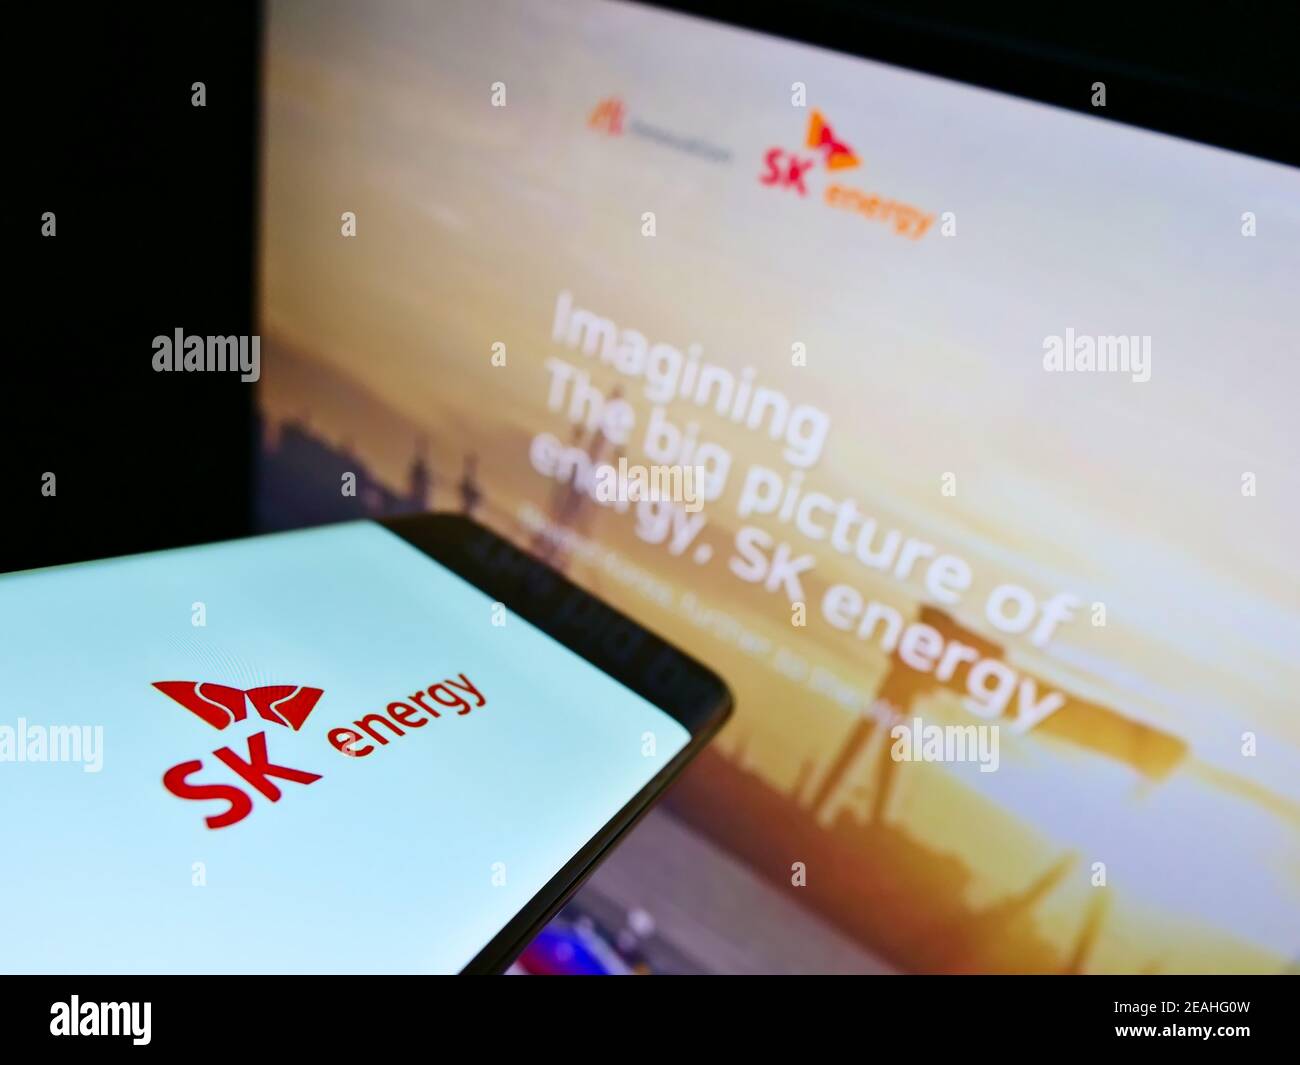 Mobile phone with business logo of South Korean oil company SK Energy on screen in front of web page. Focus on center of cellphone display. Stock Photo